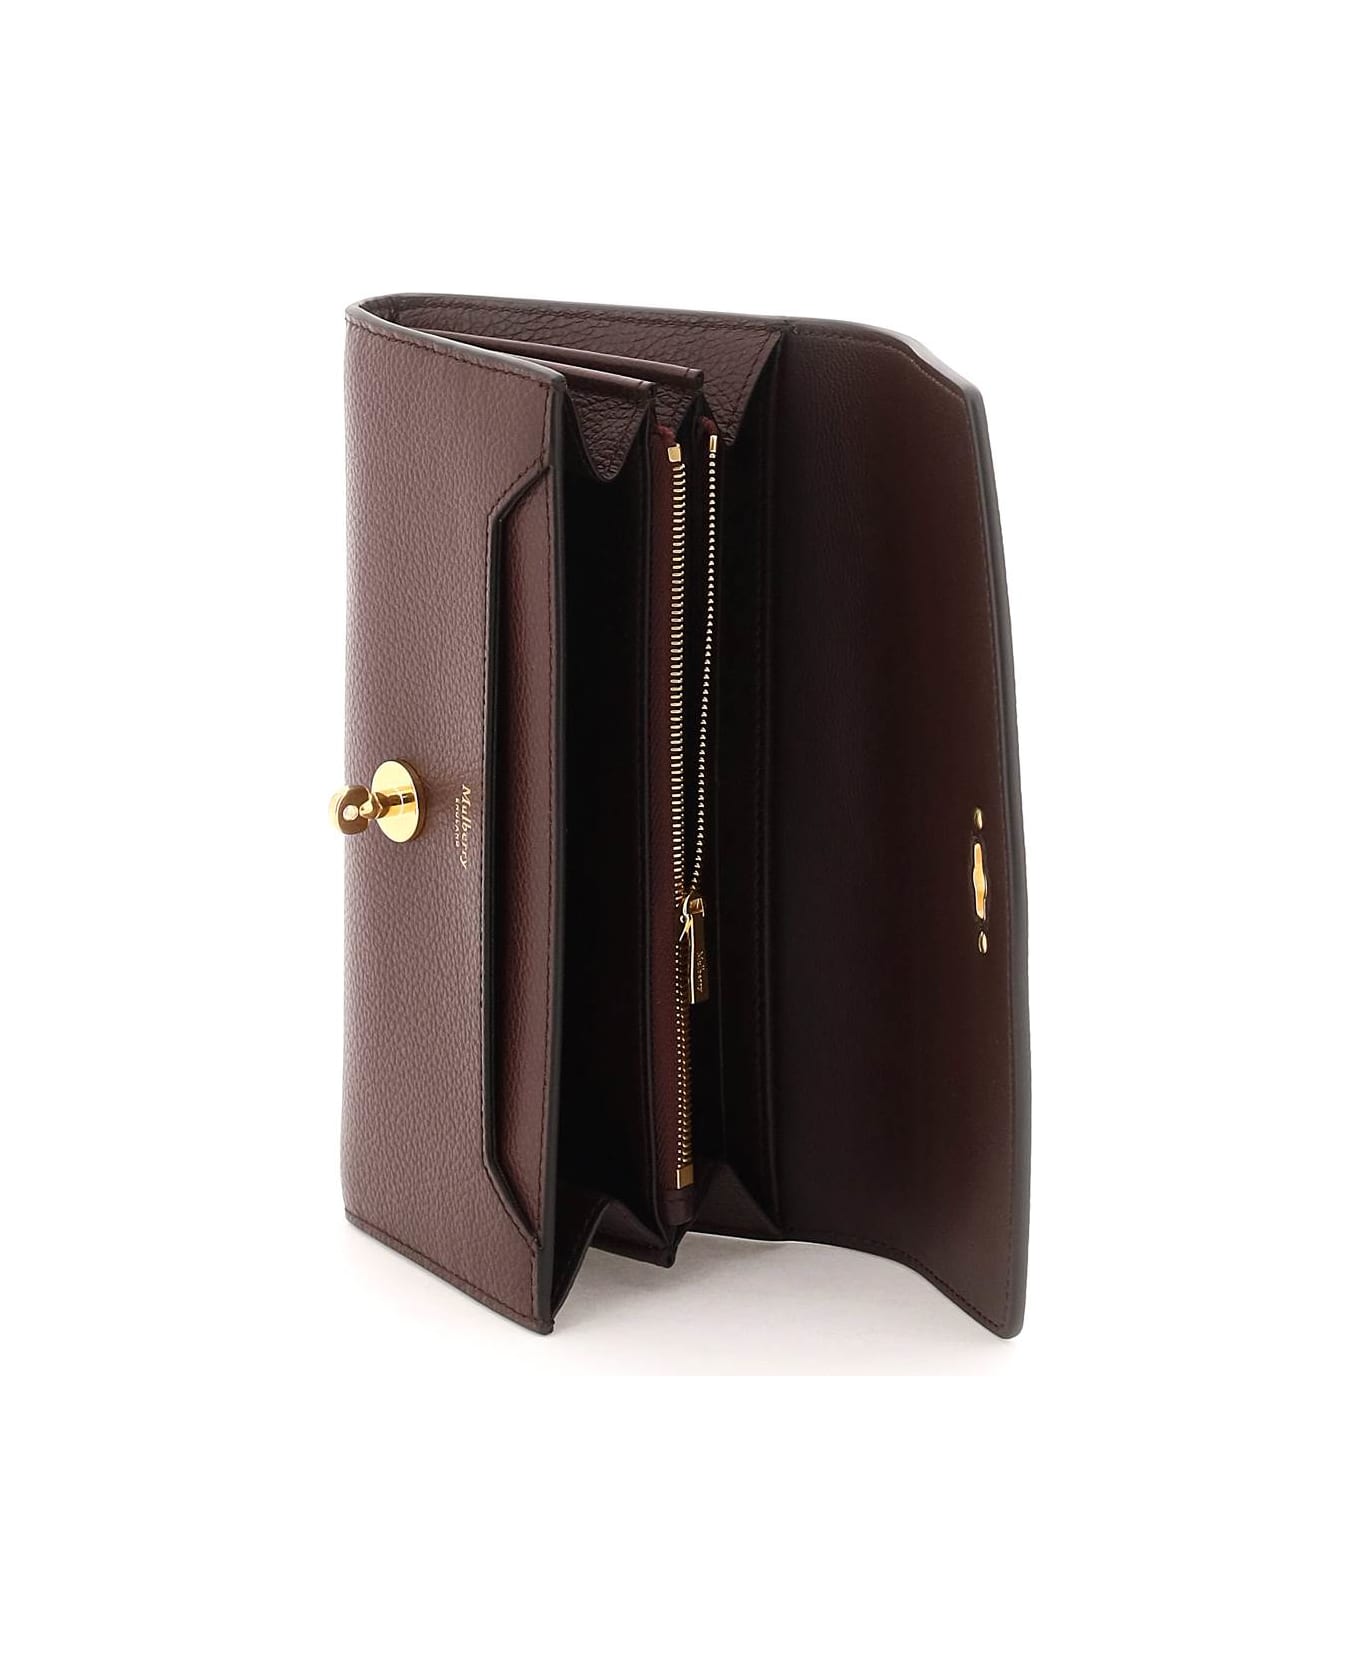 Mulberry Darley Wallet - OXBLOOD (Red)